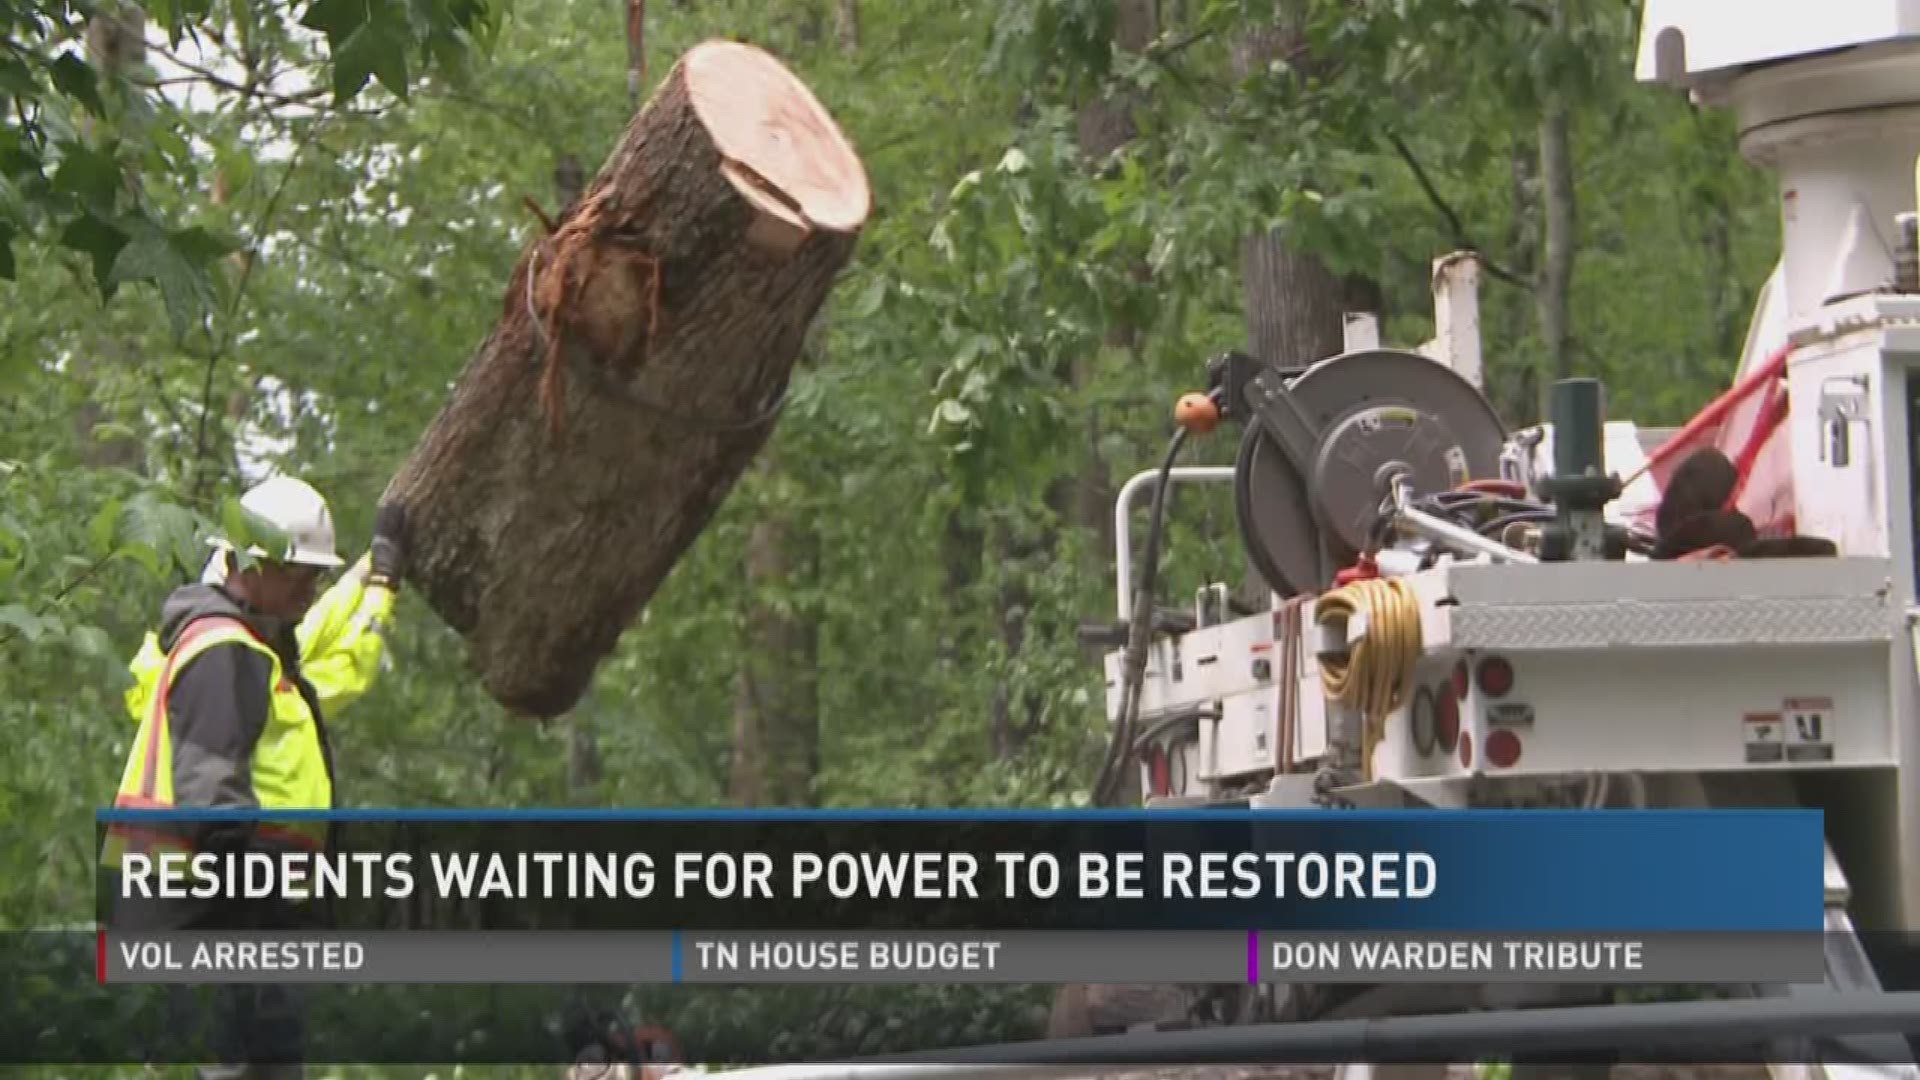 Days after strong winds uprooted trees and toppled power lines, some Sevier County residents are still waiting for power to be restored.